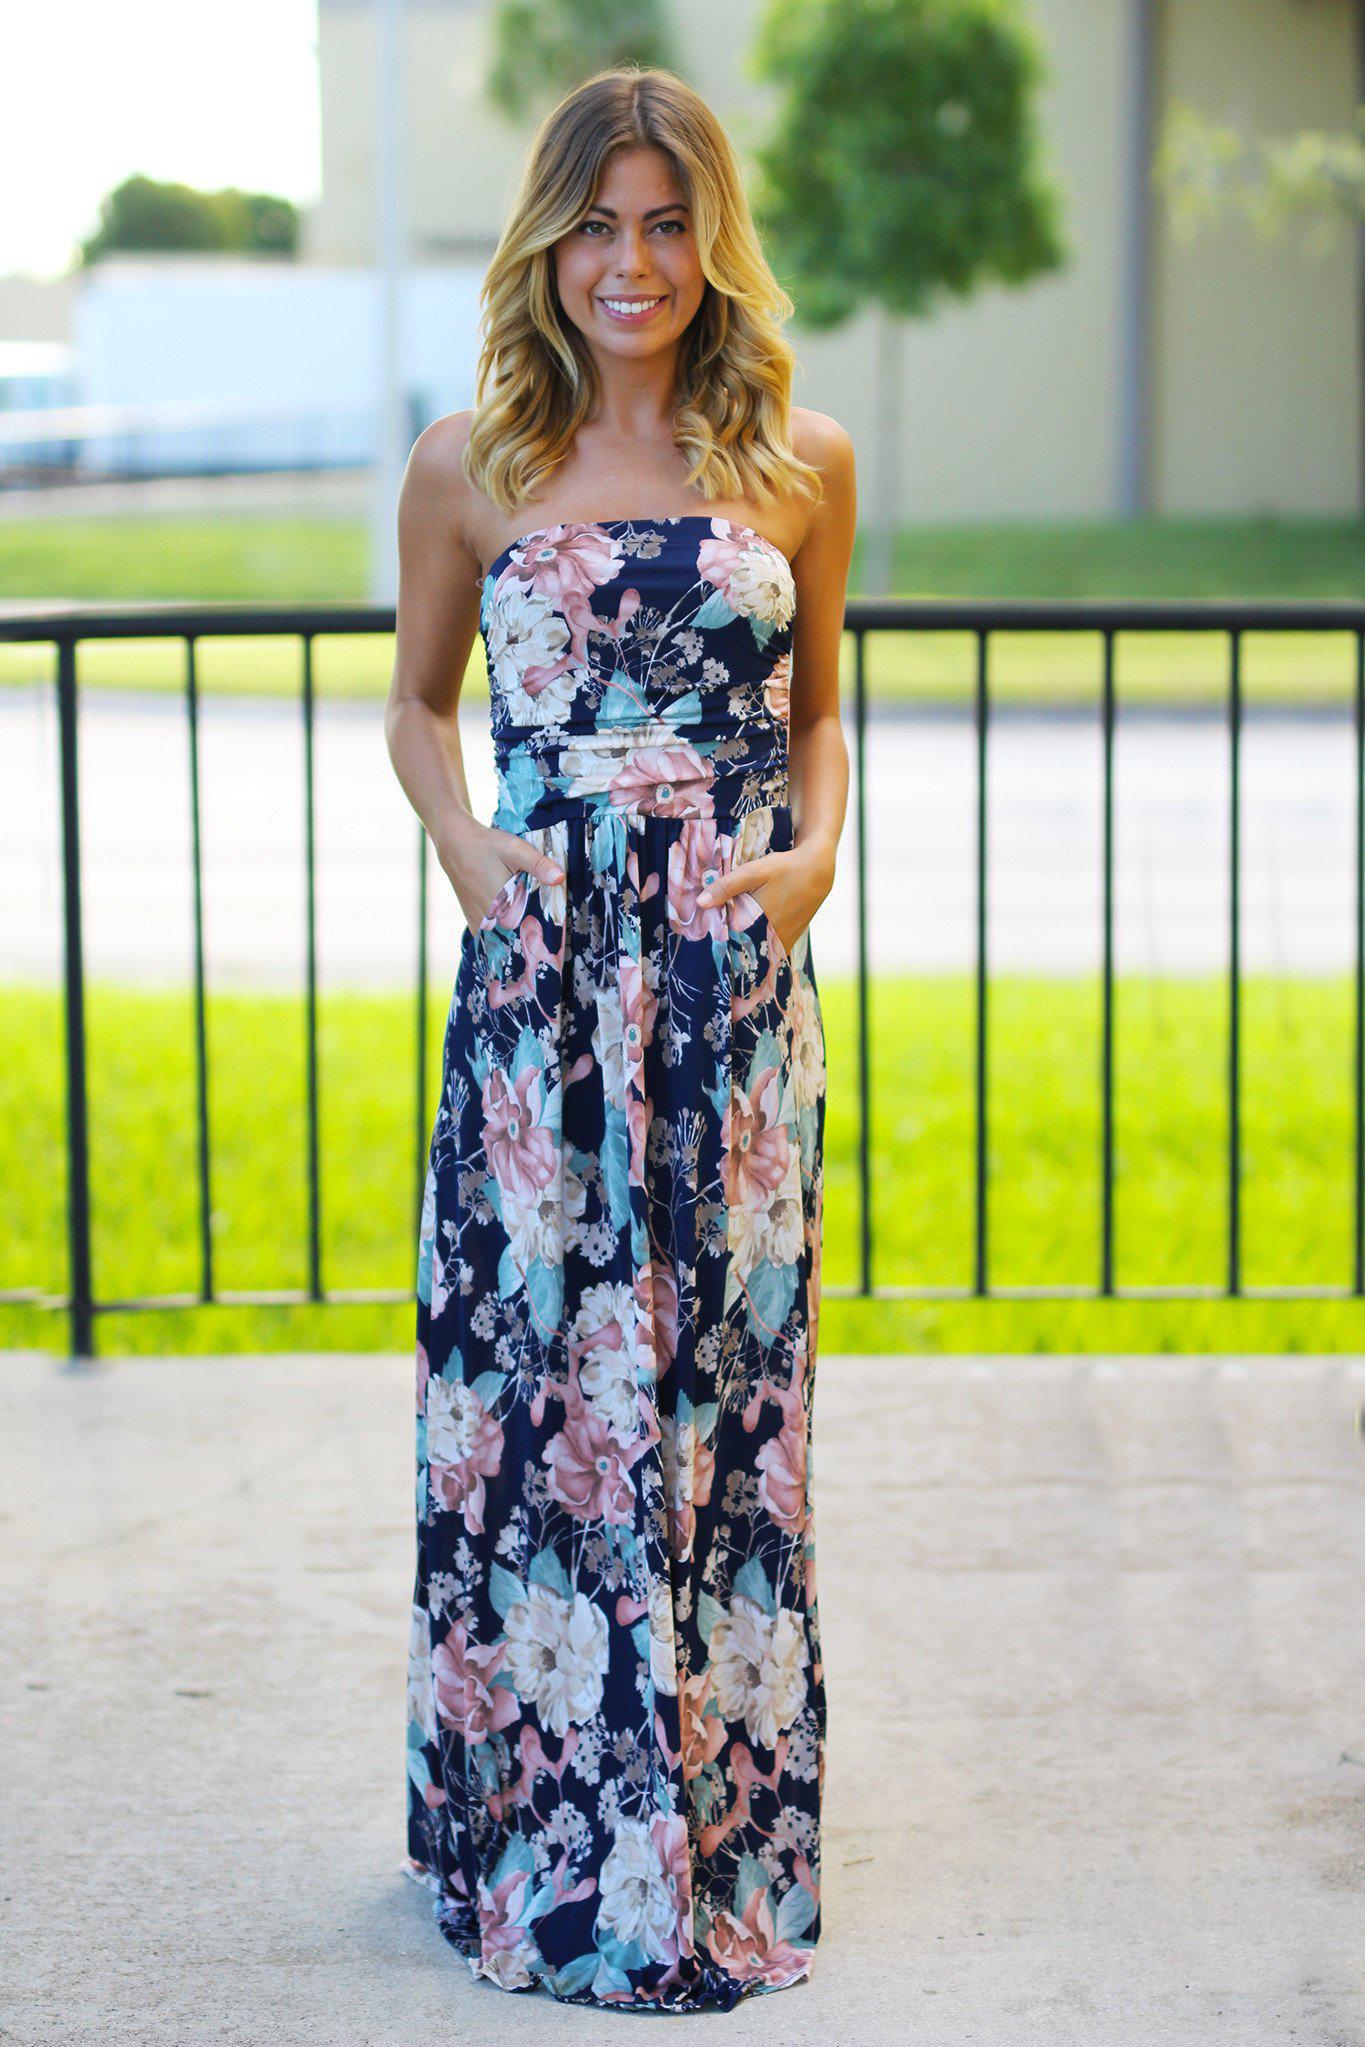 Strapless Peach and Navy Floral Maxi Dress with Pockets | Maxi Dresses ...